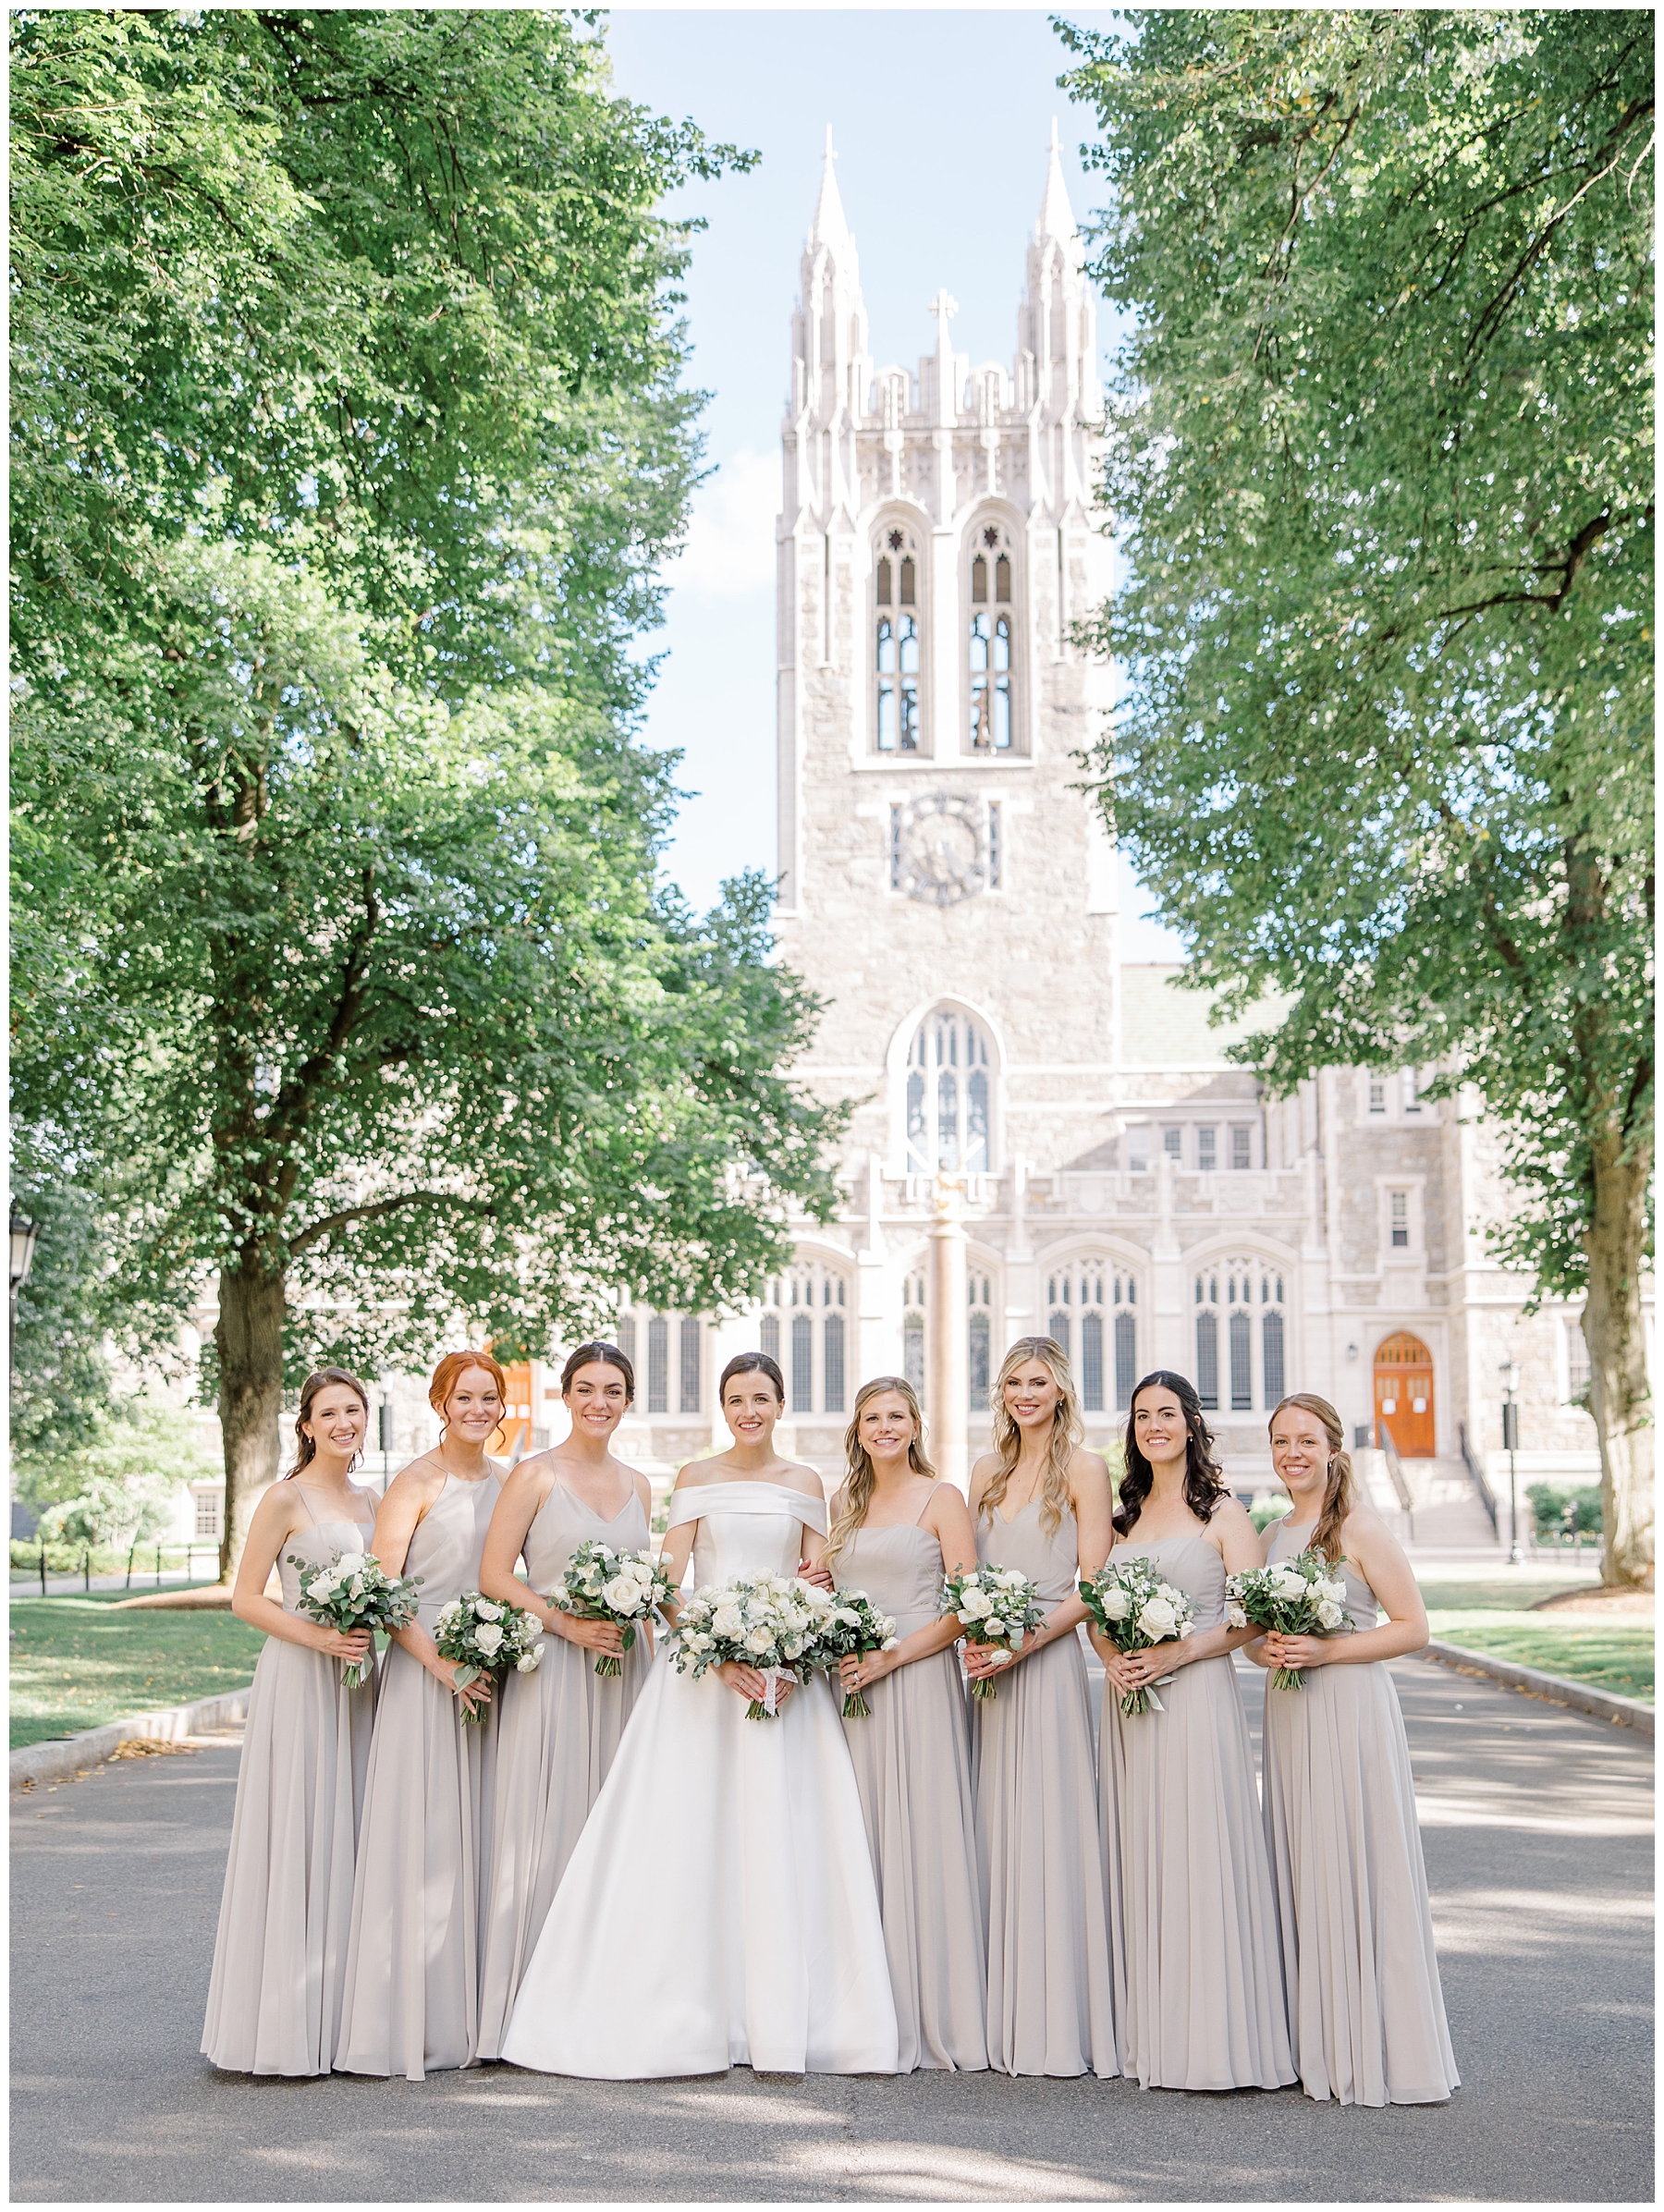 bride and bridesmaids in taupe dresses outside of grand Boston church